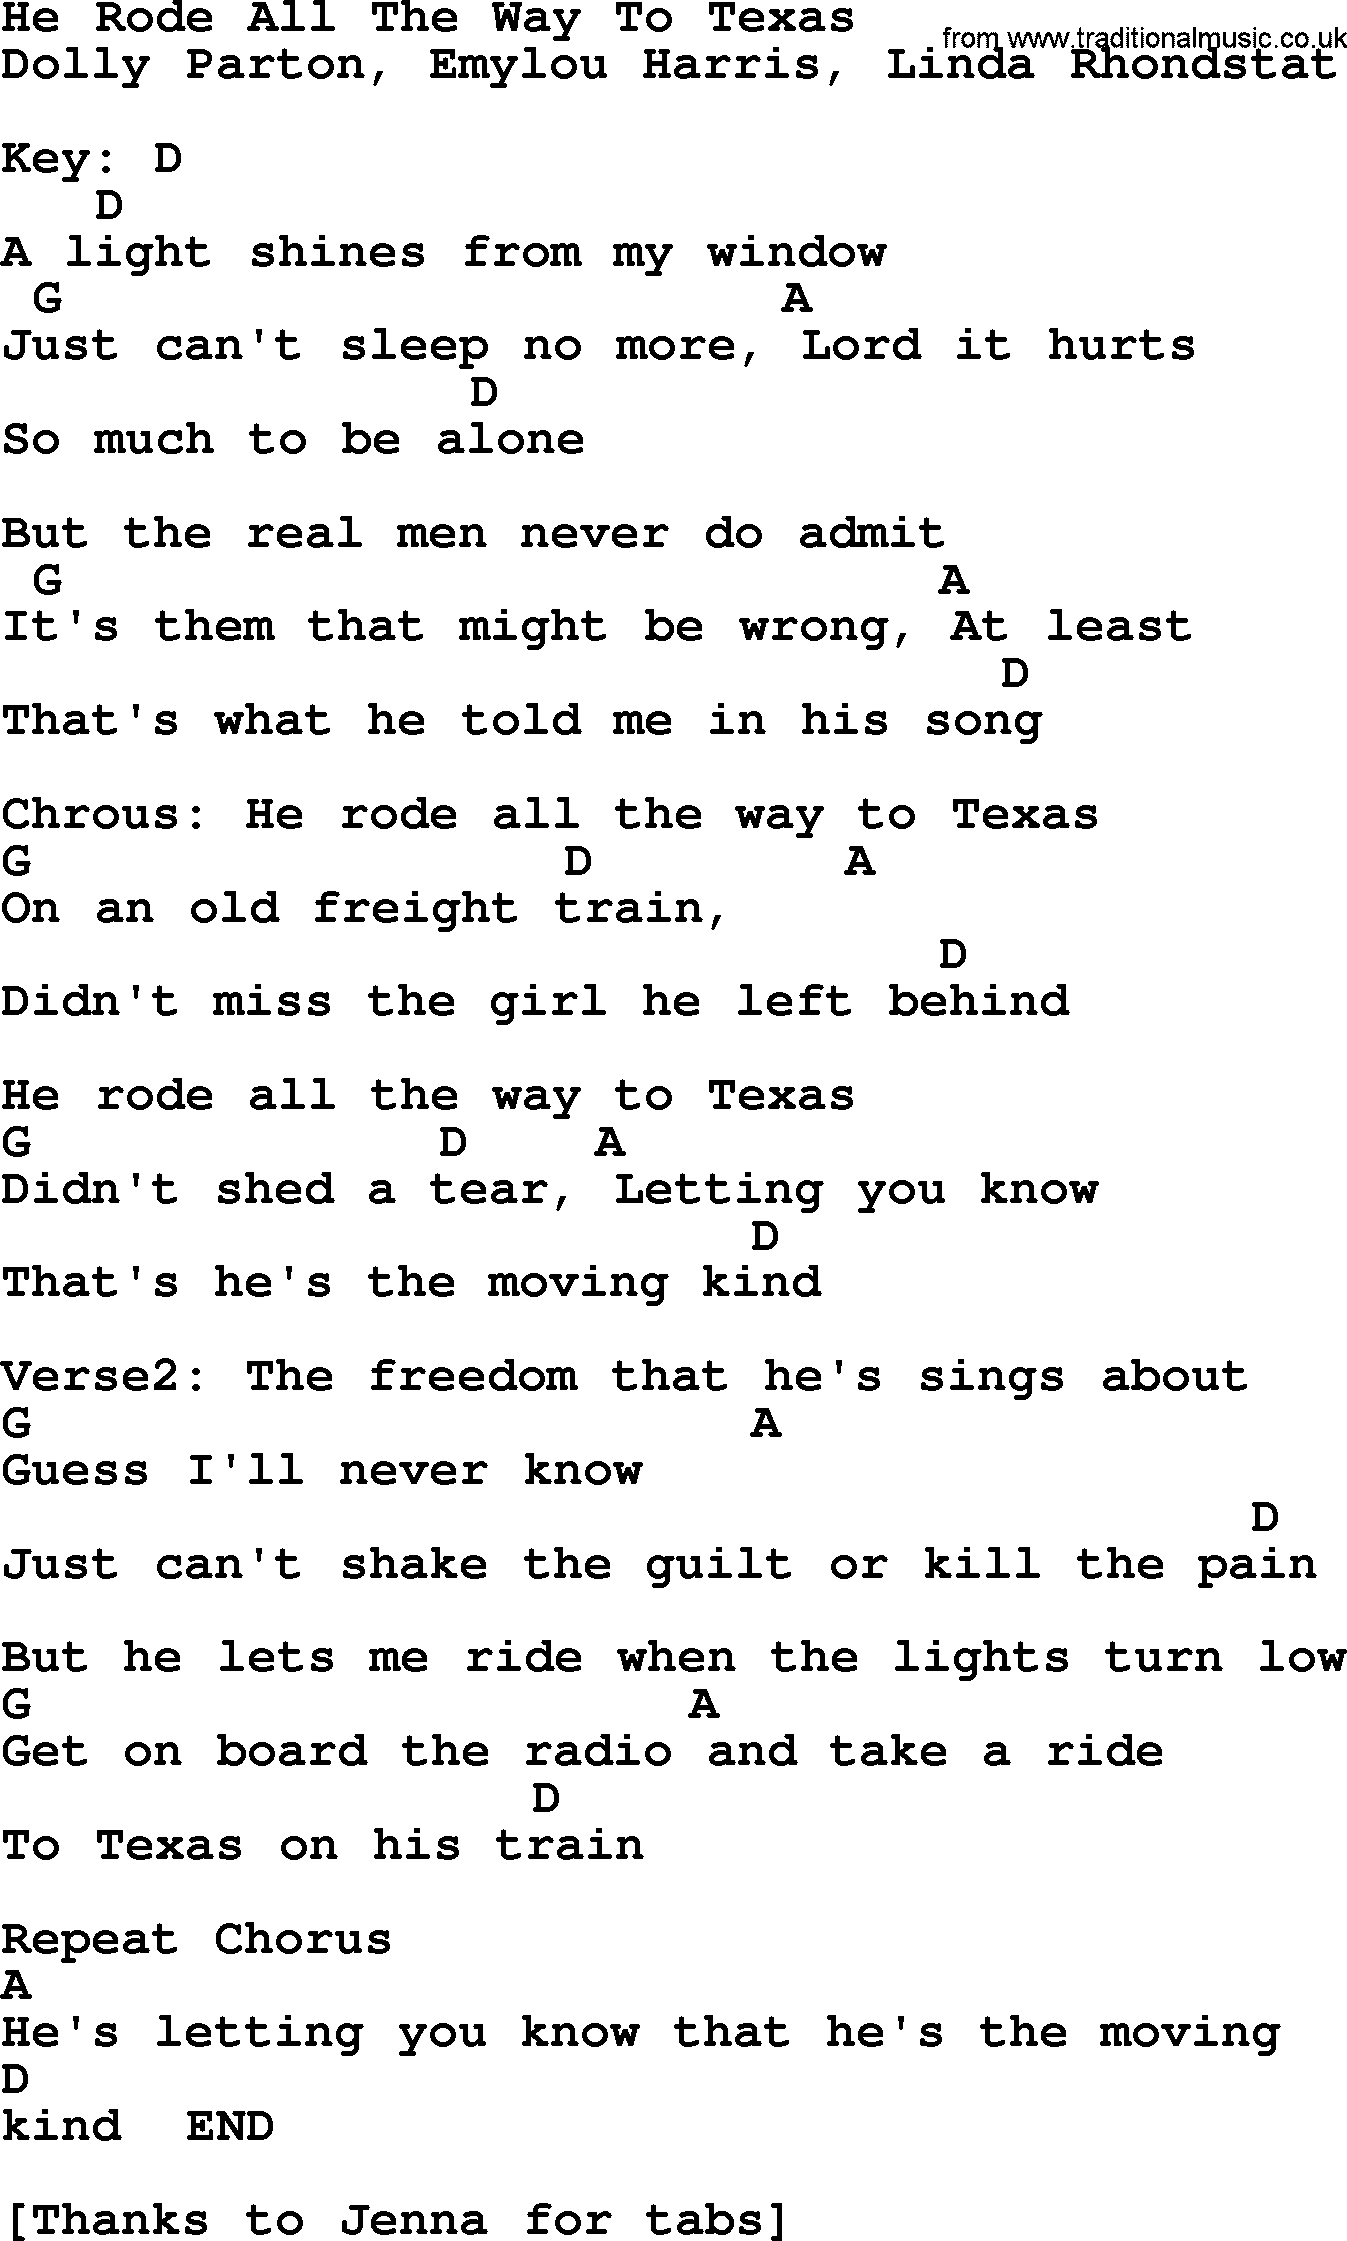 Bluegrass song: He Rode All The Way To Texas, lyrics and chords